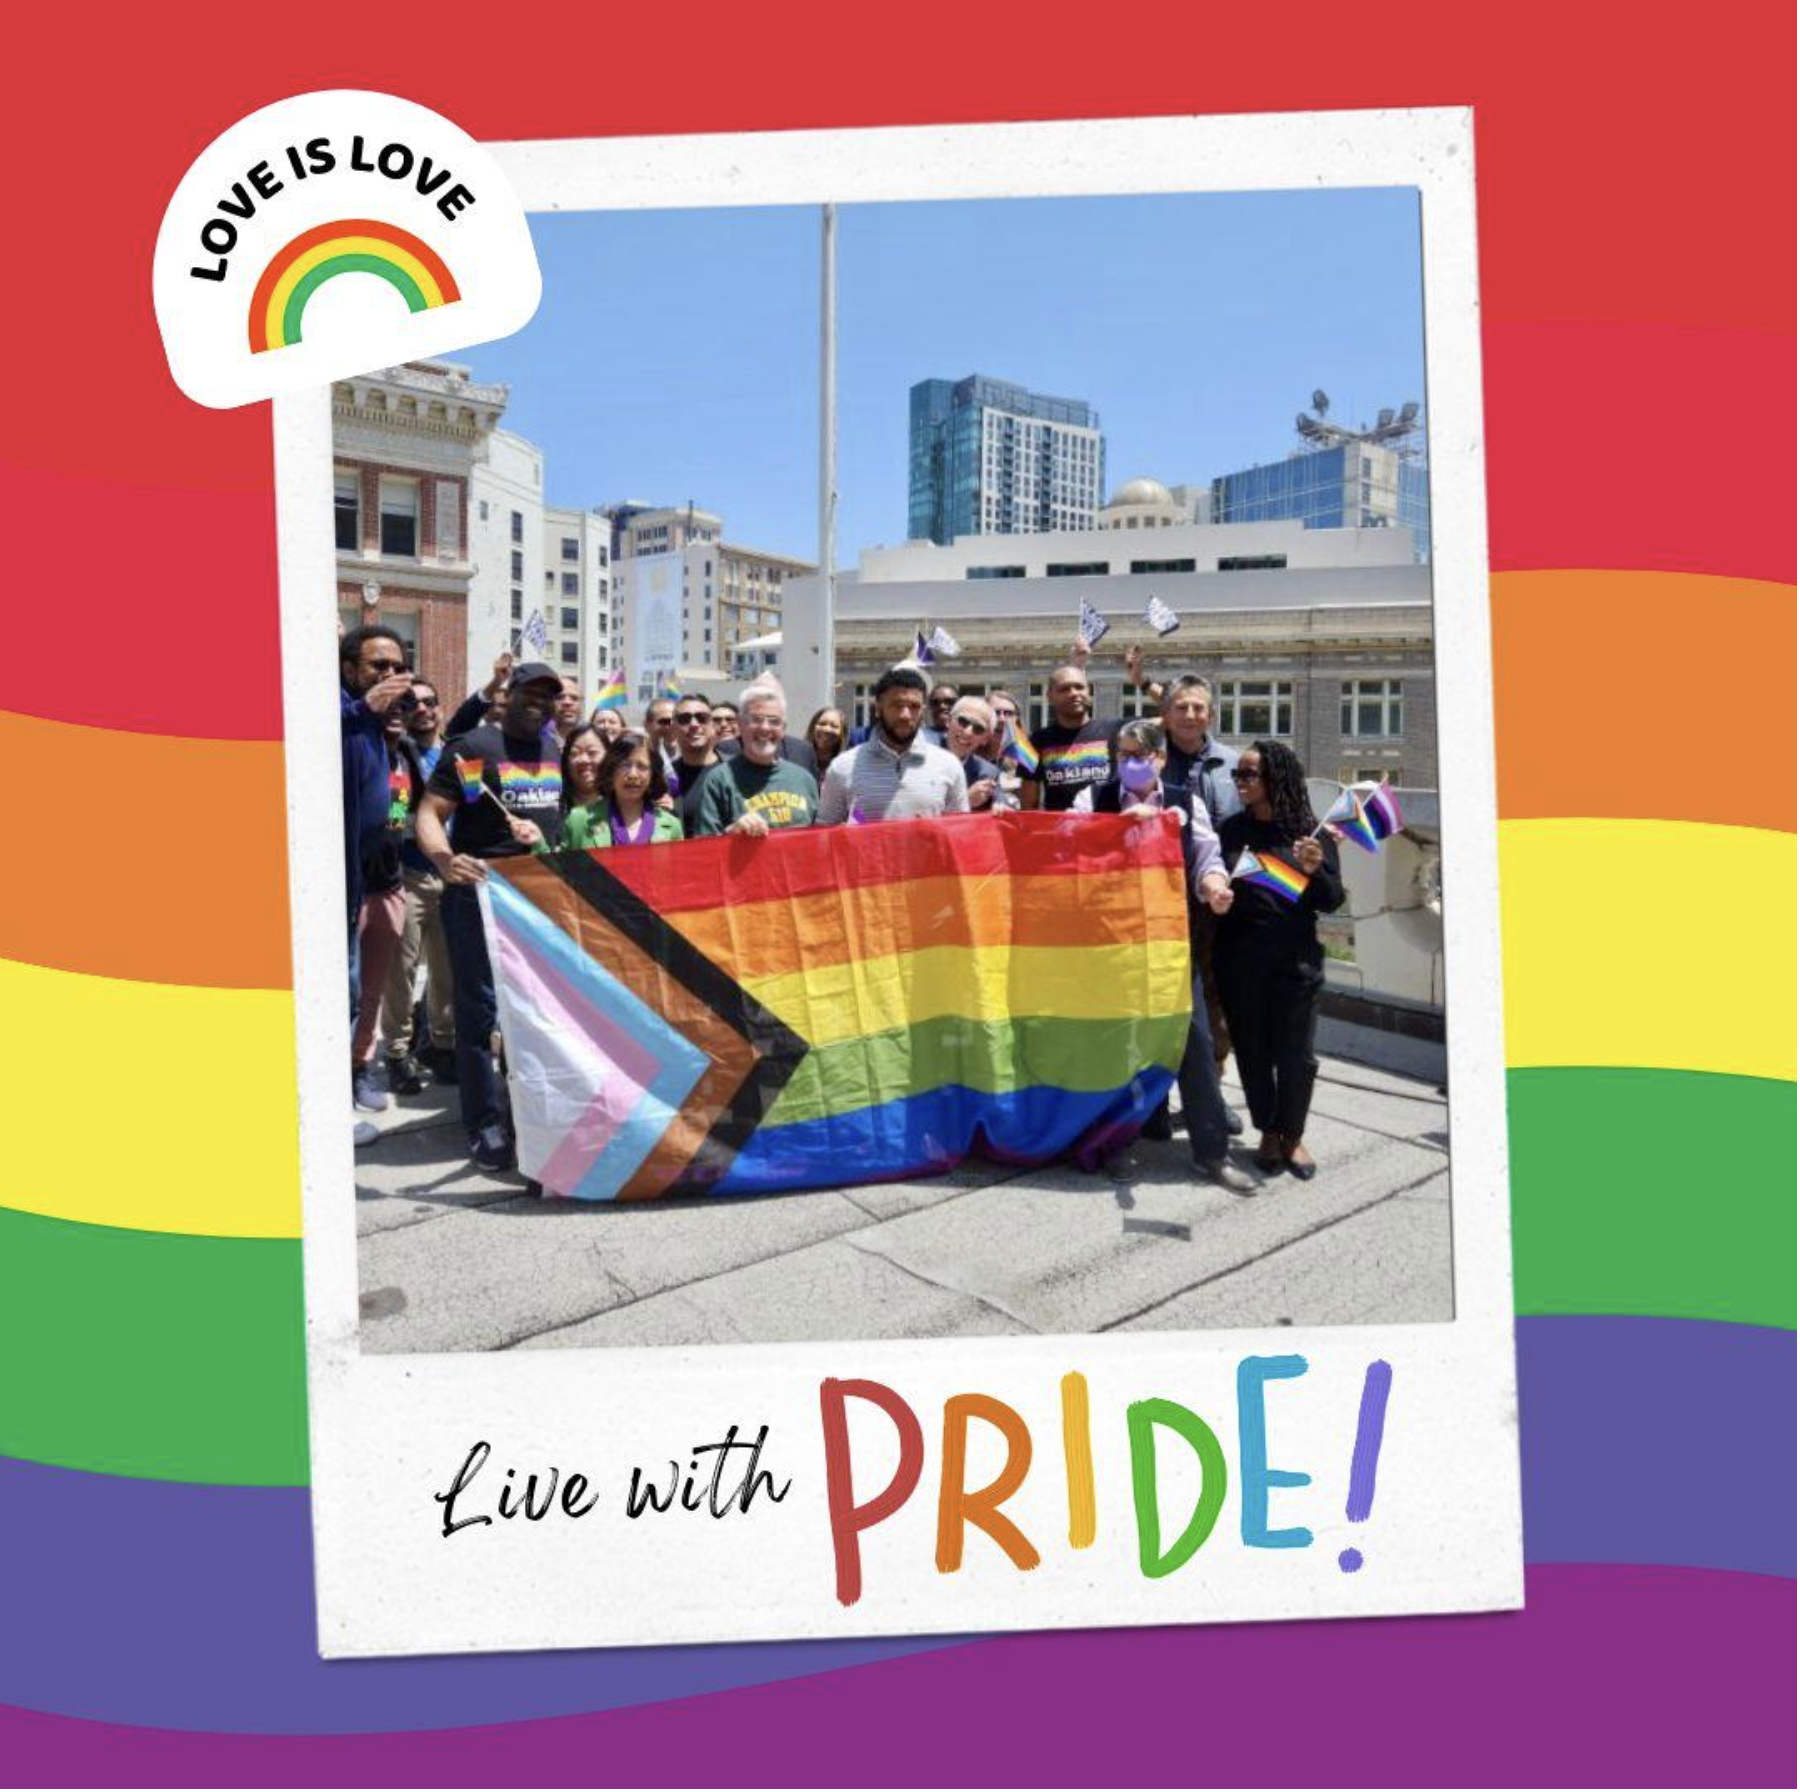 Council Member Poses in a Group Photo w/the Pride Flag